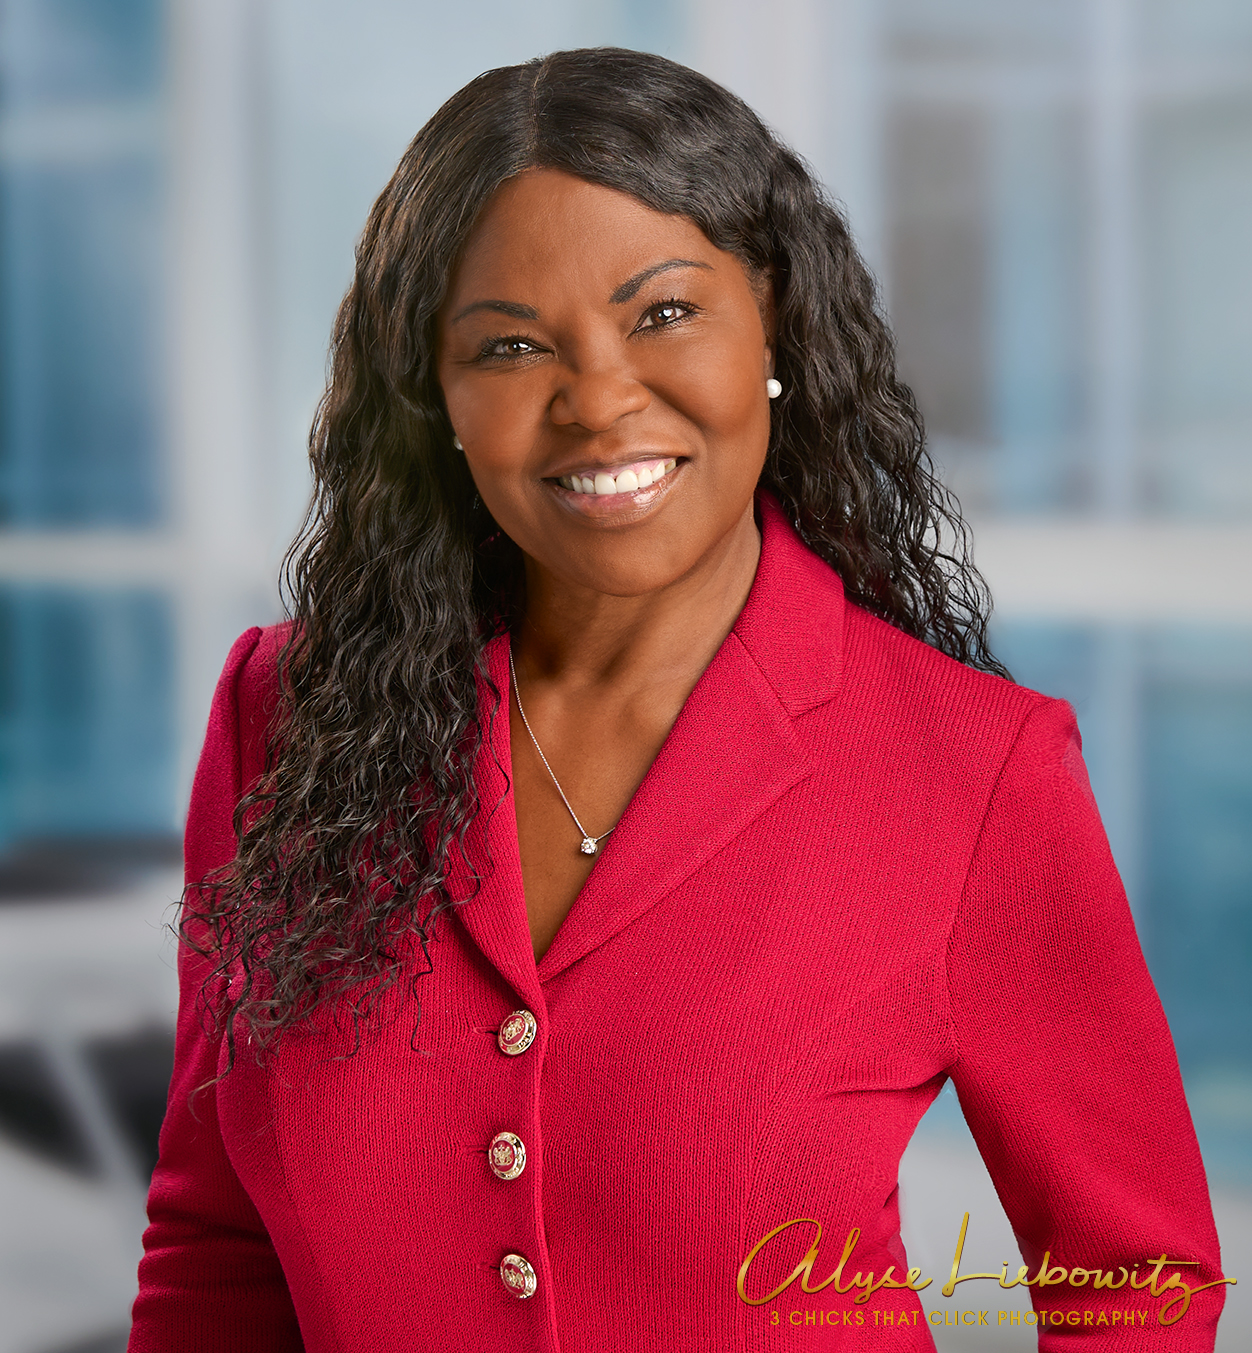 Lynda Wright, Realtor, Berkshire Hathaway/Fox & Roach, photographed by 3 Chicks That Click Photography